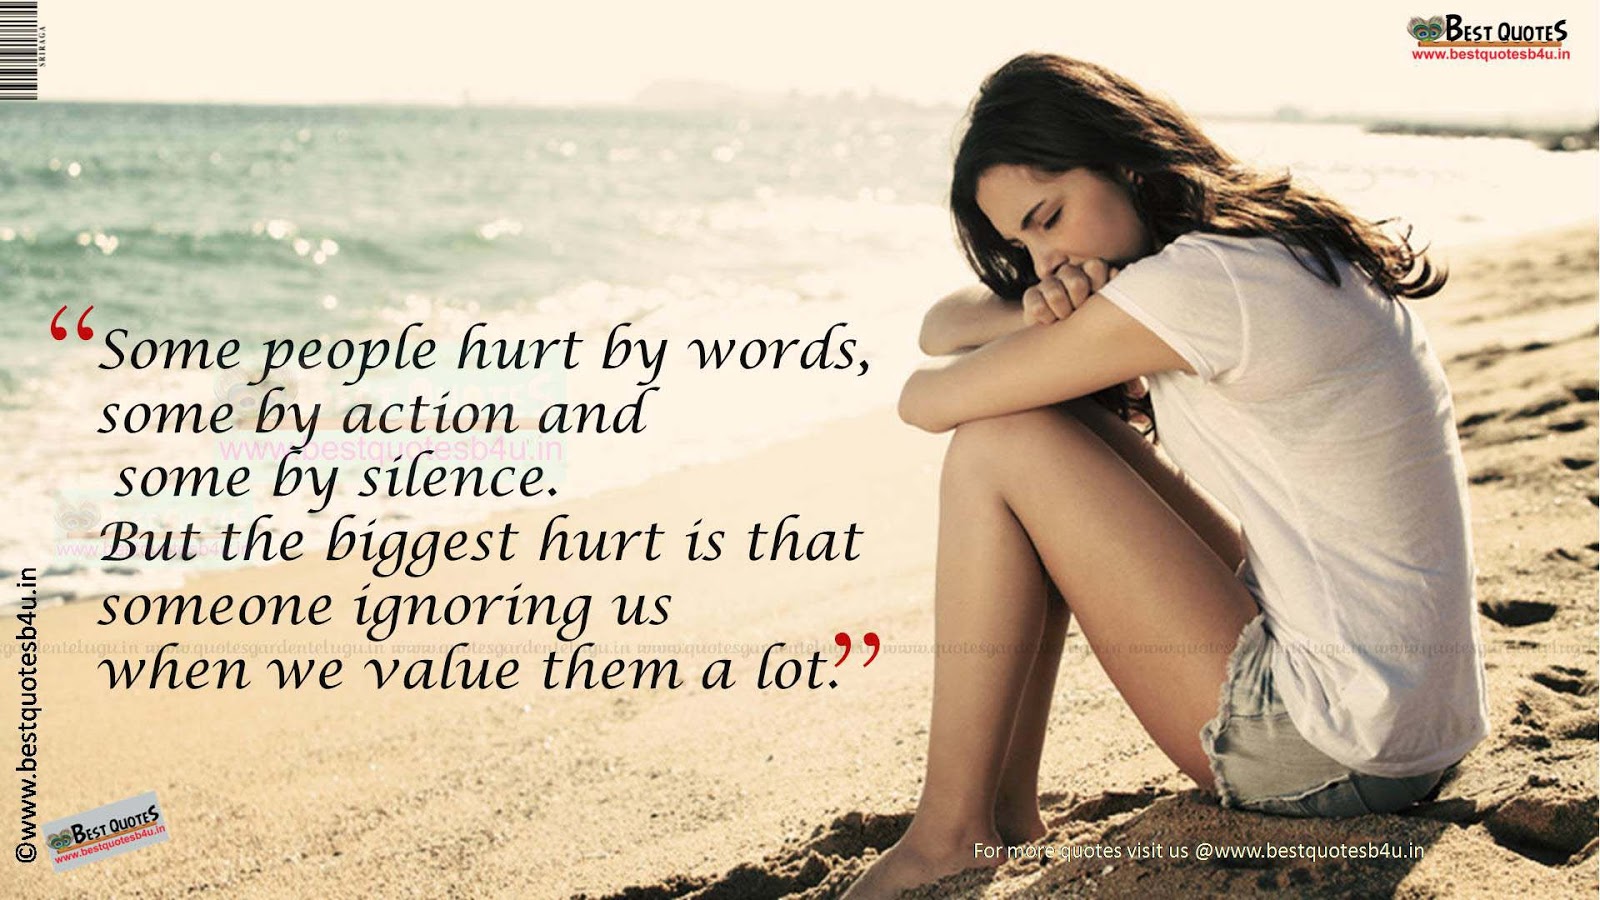 50 Best Heart Touching quotes  Heart touching thoughts  Best Quotes    Quote Sigma